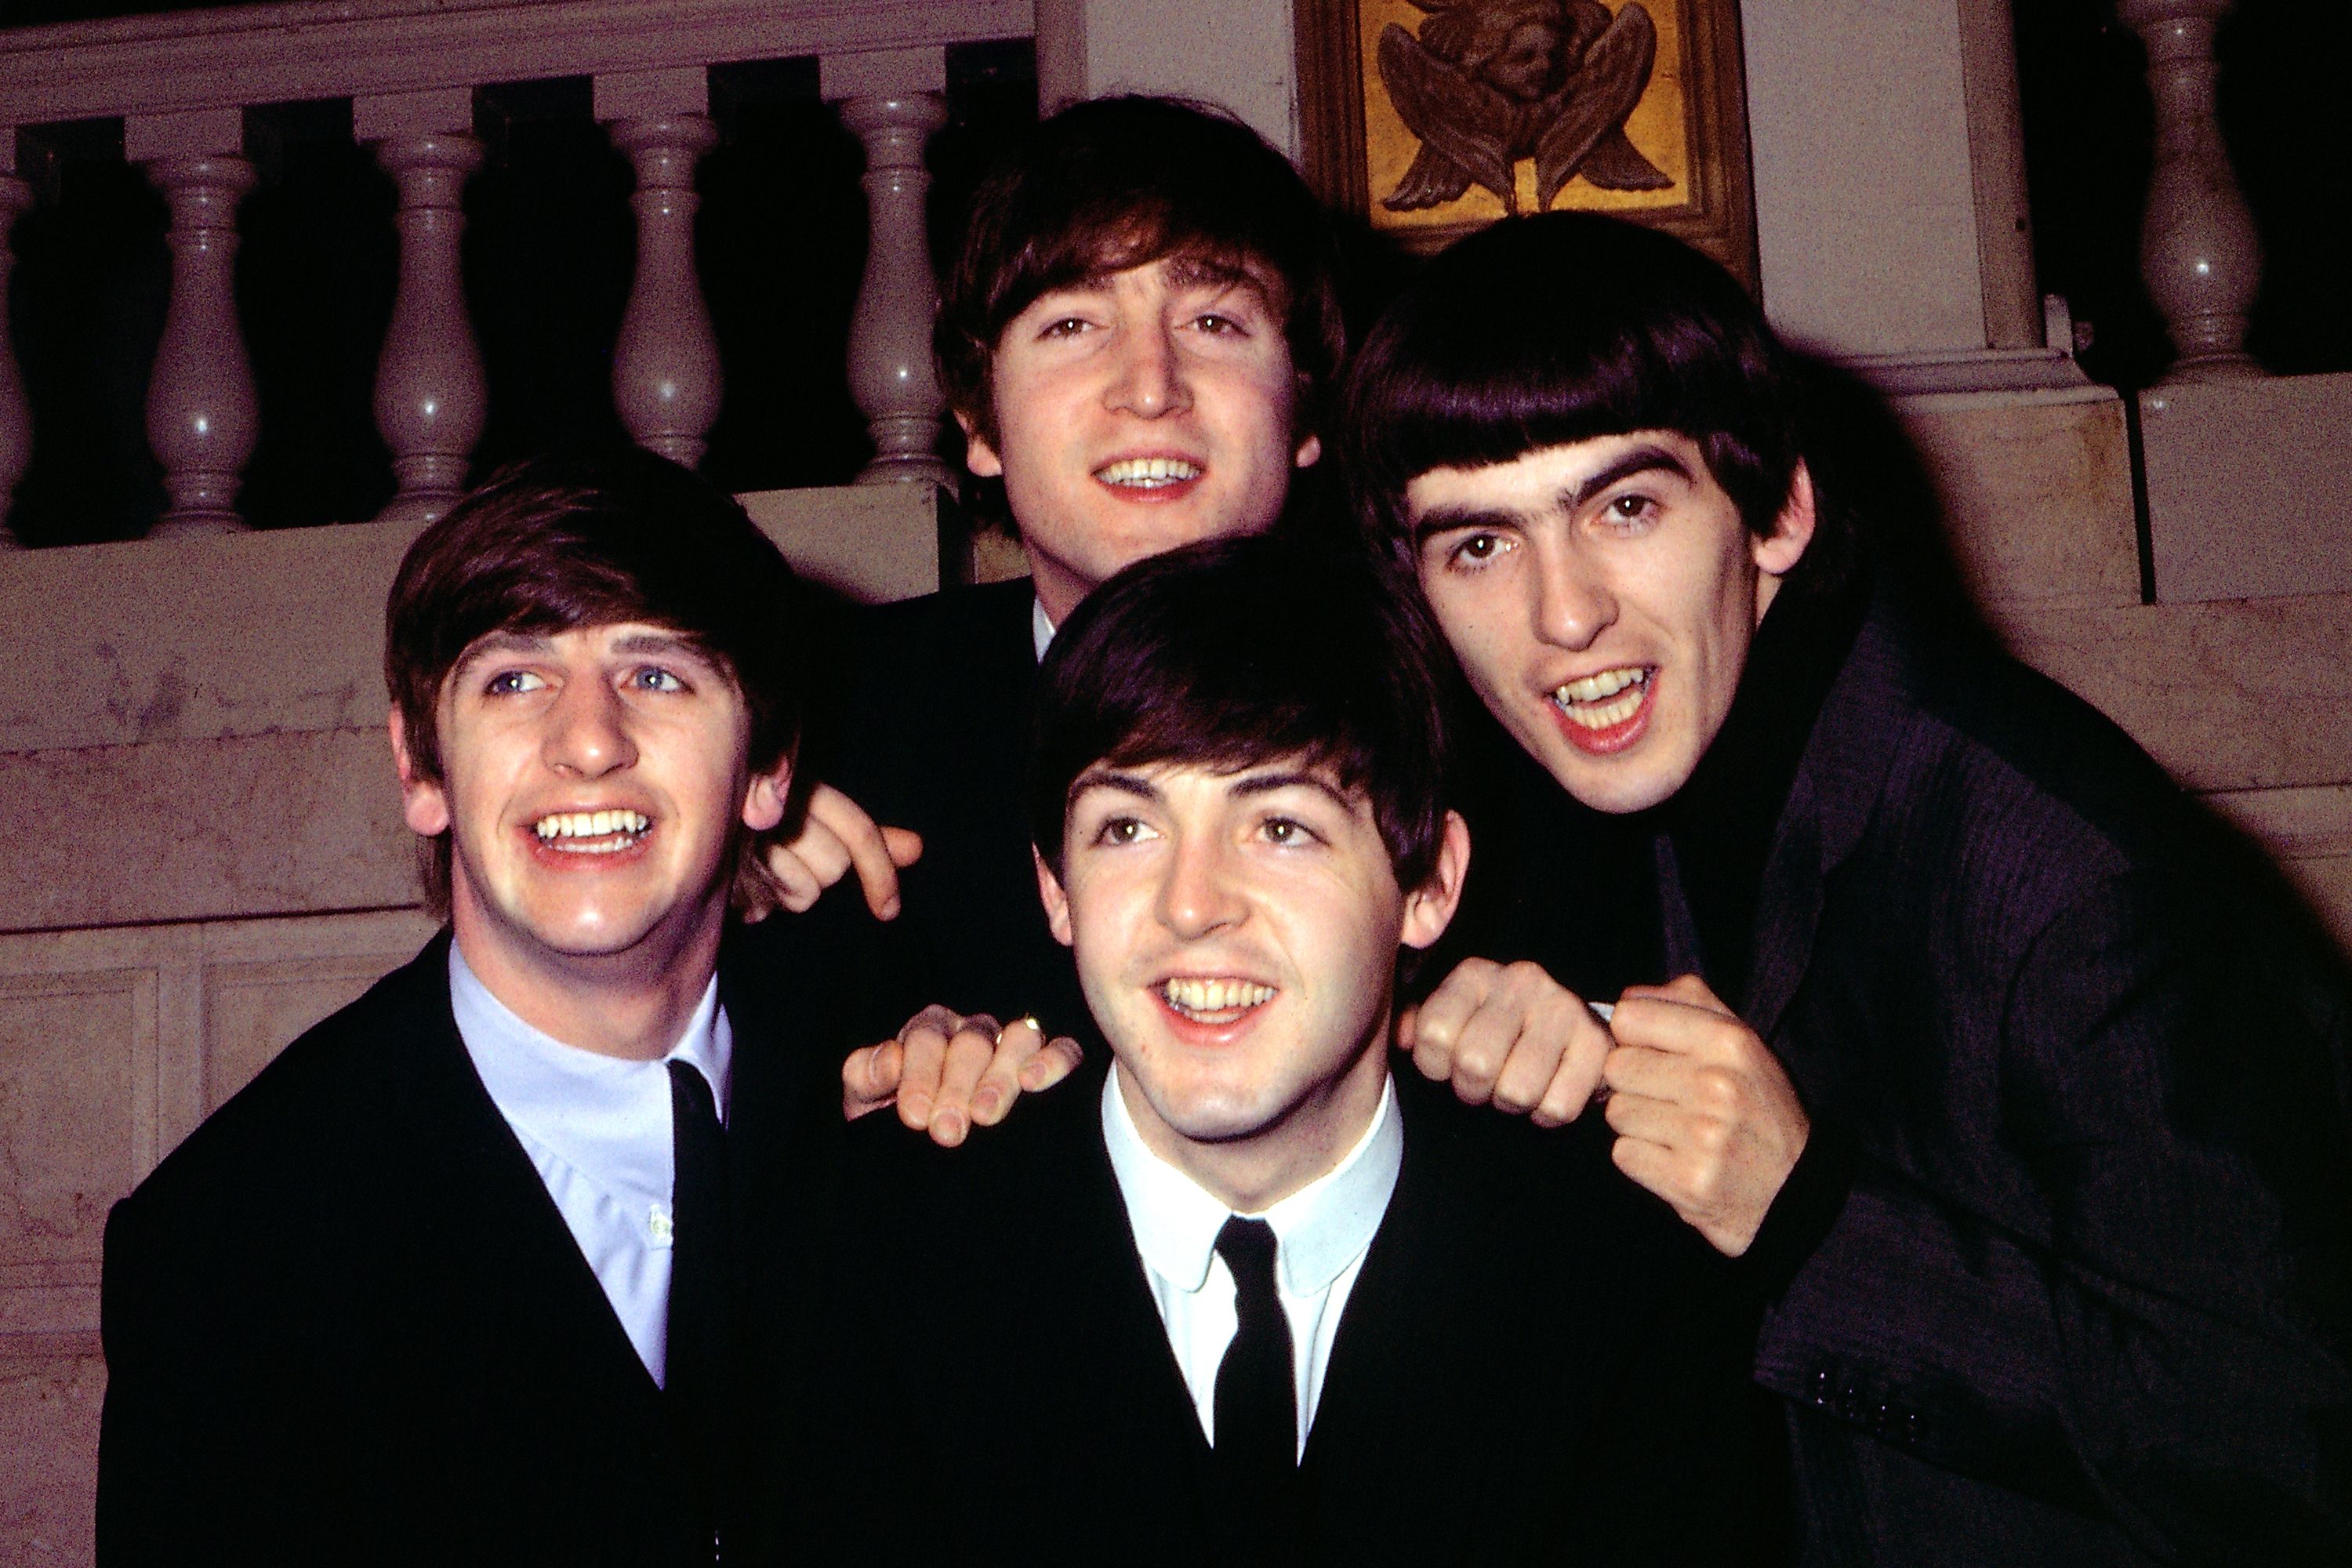 The Beatles 'Now and Then': Listen to their last new song